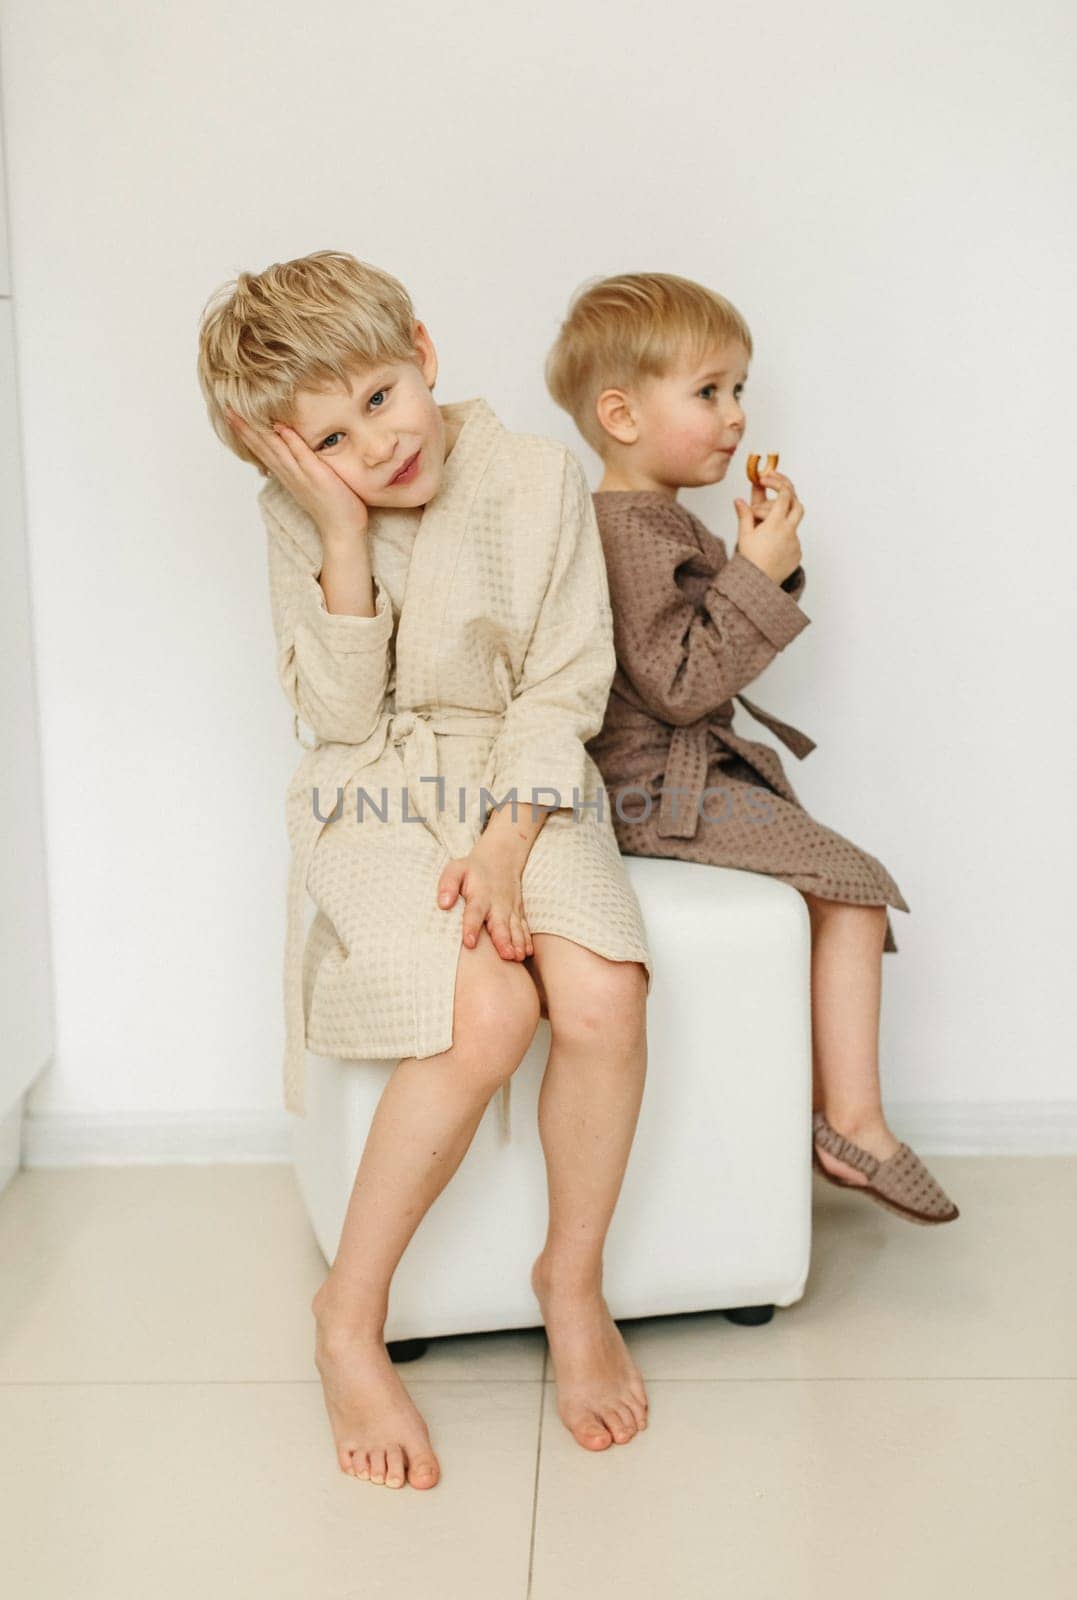 Two boys in bathrobes are sitting on a pouf in a white room.